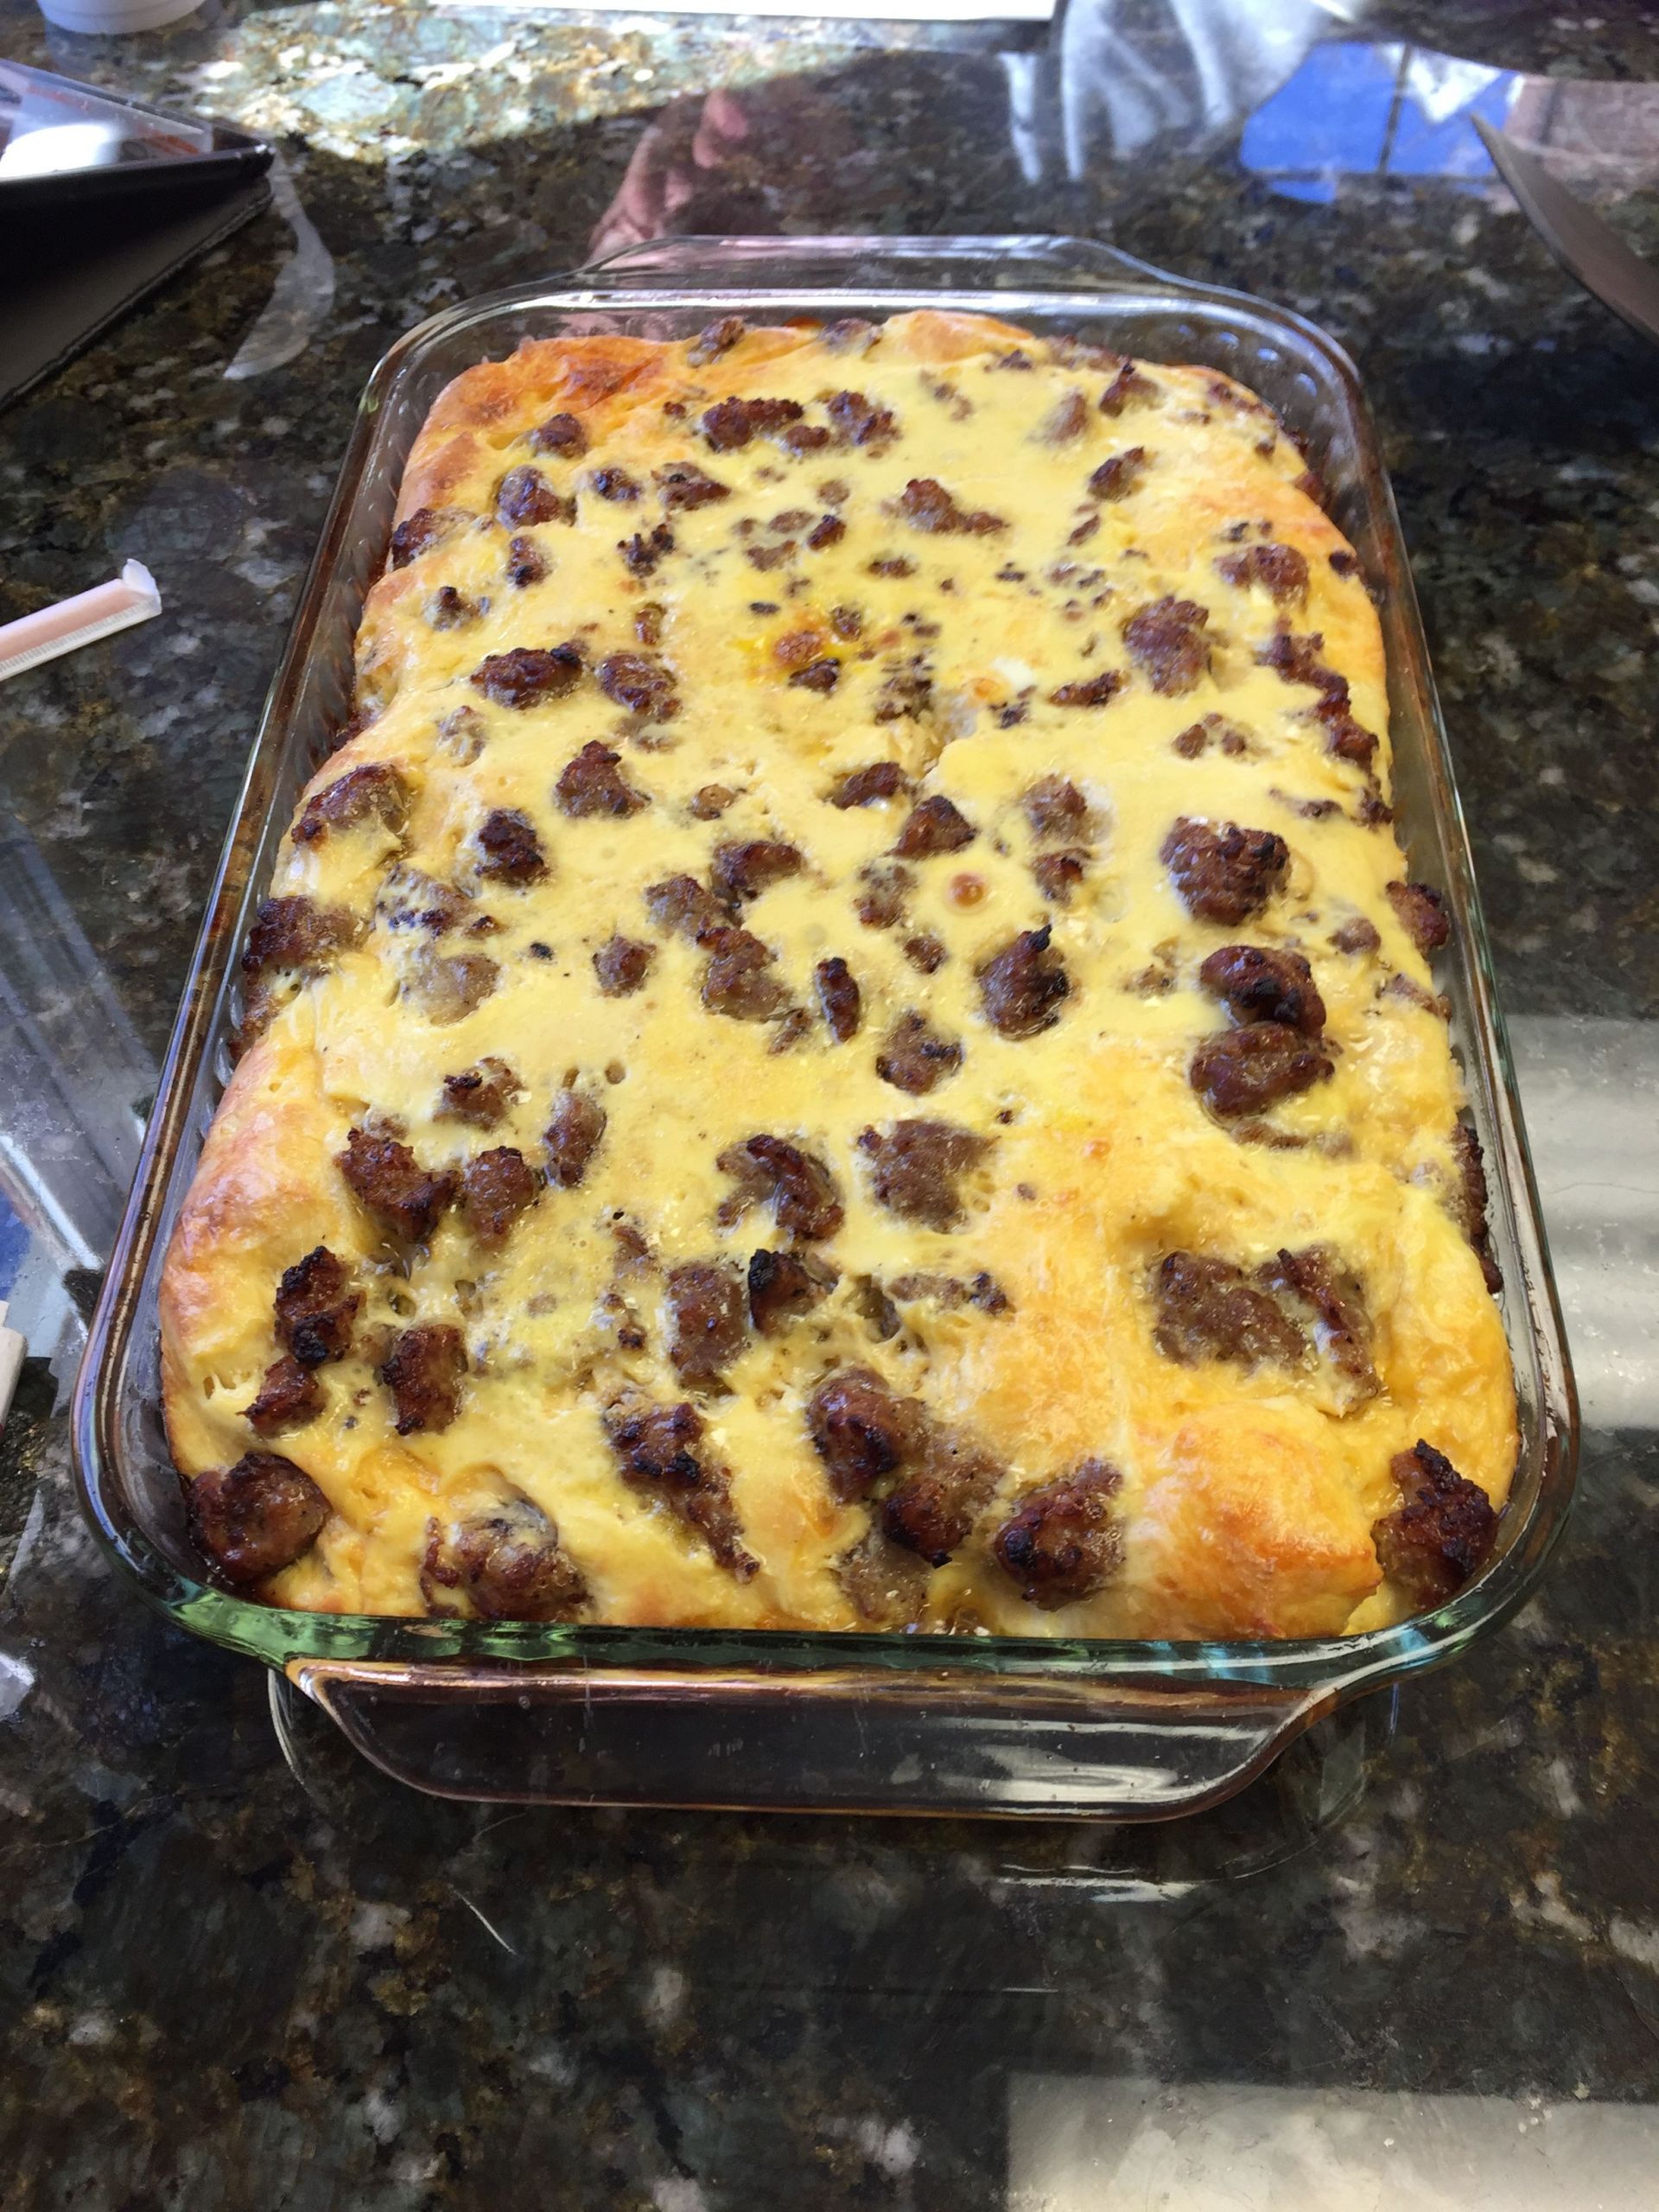 Breakfast Casserole With Bread Slices
 Breakfast Casserole 7 slices of white bread crusts remove